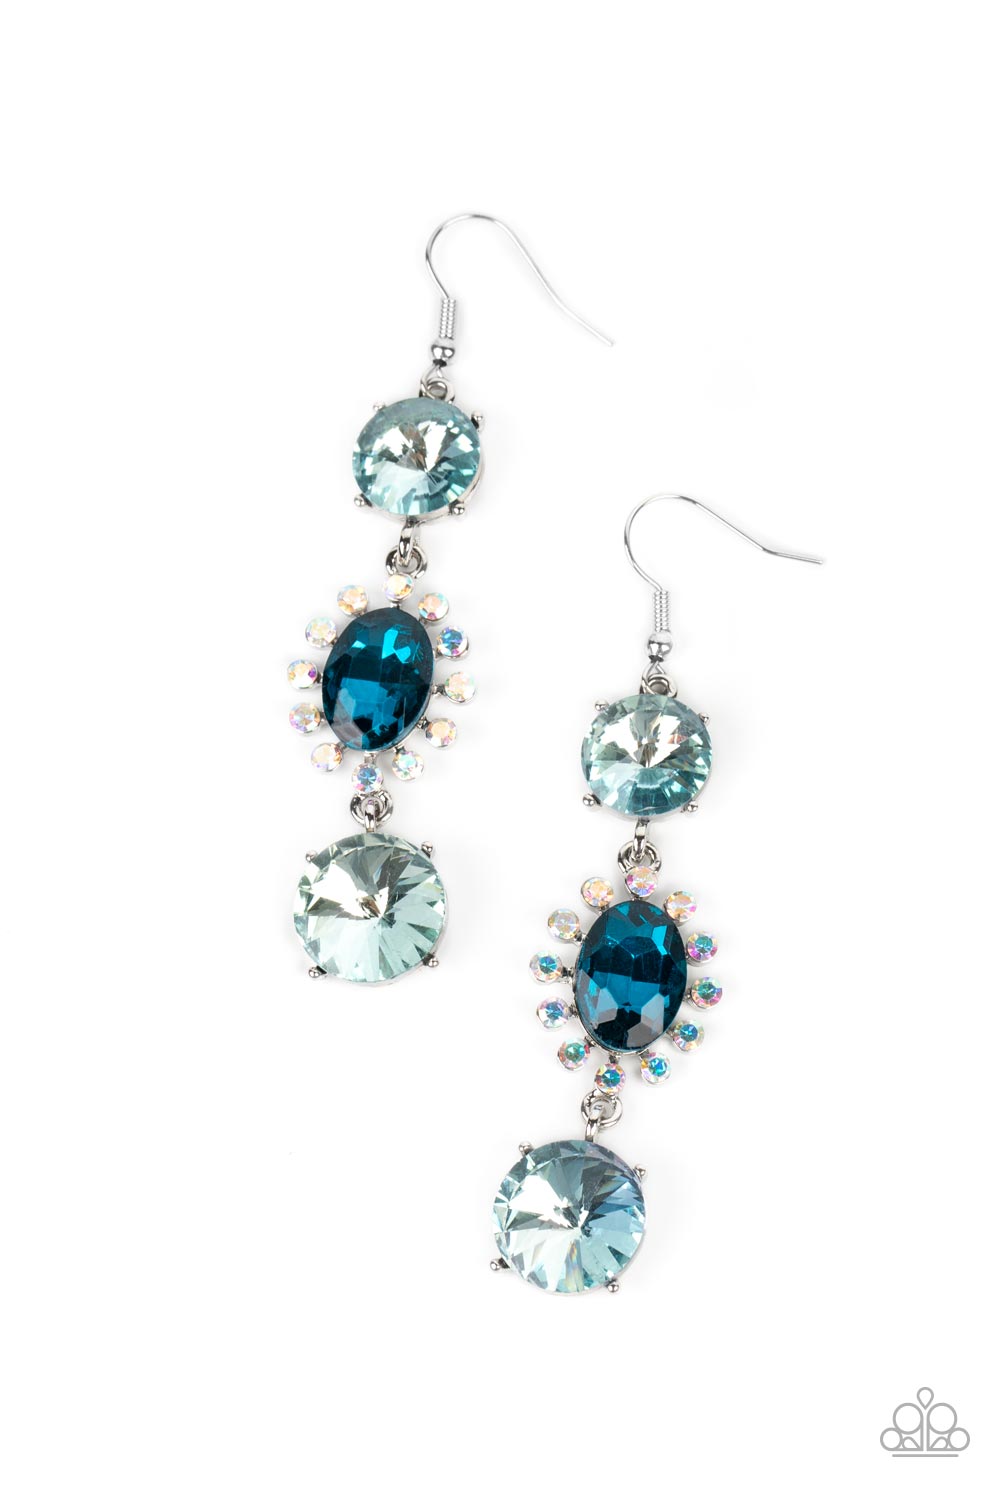 Magical Melodrama Blue Earring - Paparazzi Accessories  A trio of colorfully iridescent and brilliantly sparkling blue gems are linked together as they fall glamorously from the ear. A round-cut gem with an exaggerated faceted surface anchors the cascade, followed by an oval-cut navy rhinestone bordered in iridescent rhinestones. Another round-cut gem finishes off the design in a sparkling finish. Earring attaches to a standard fishhook fitting. Due to its prismatic palette, color may vary.